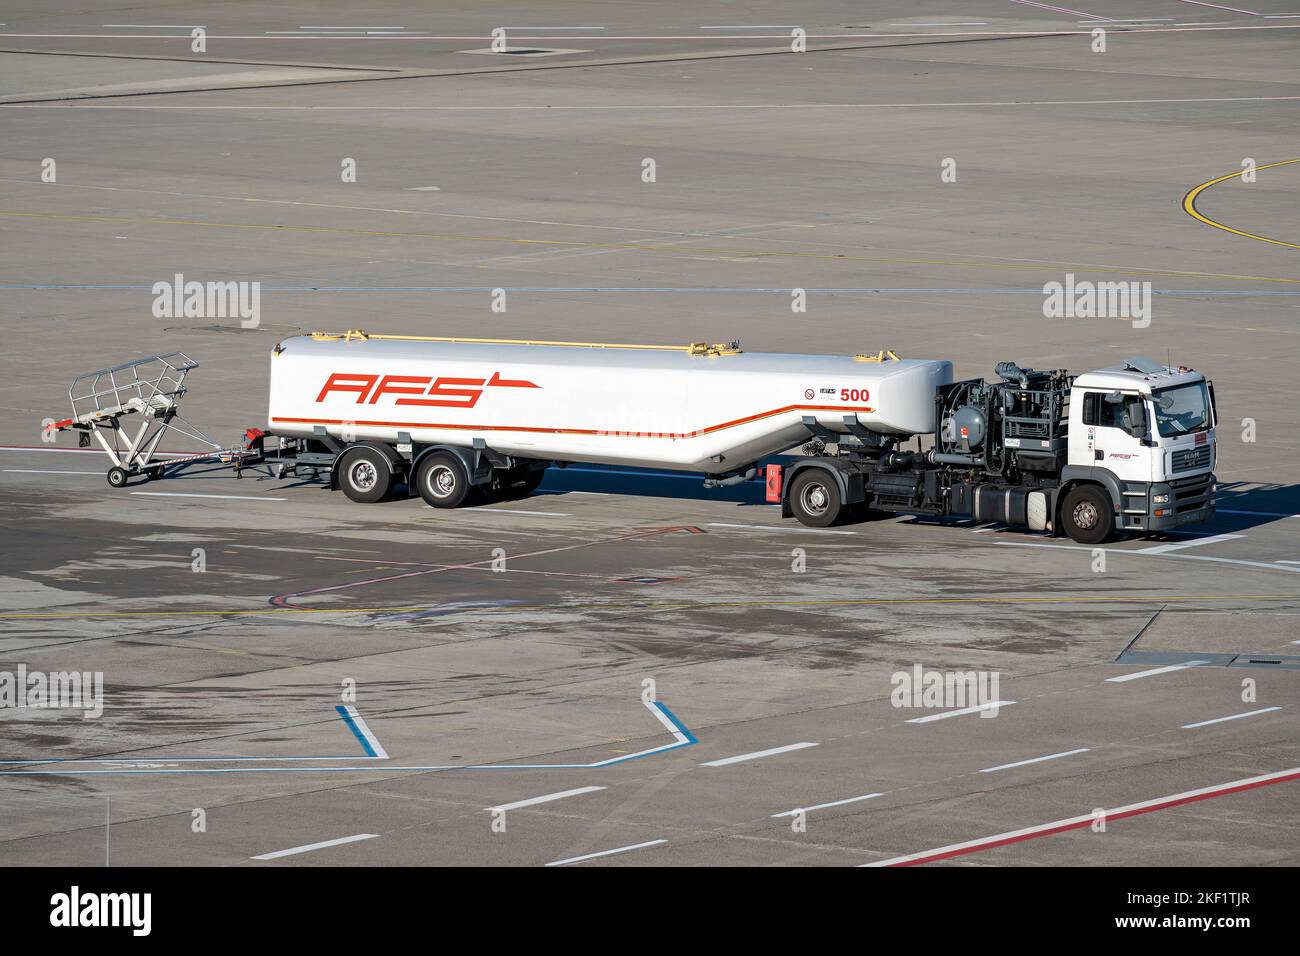 AFS Aviation MAN Fuel Services tank truck at Cologne Bonn Airport Stock Photo